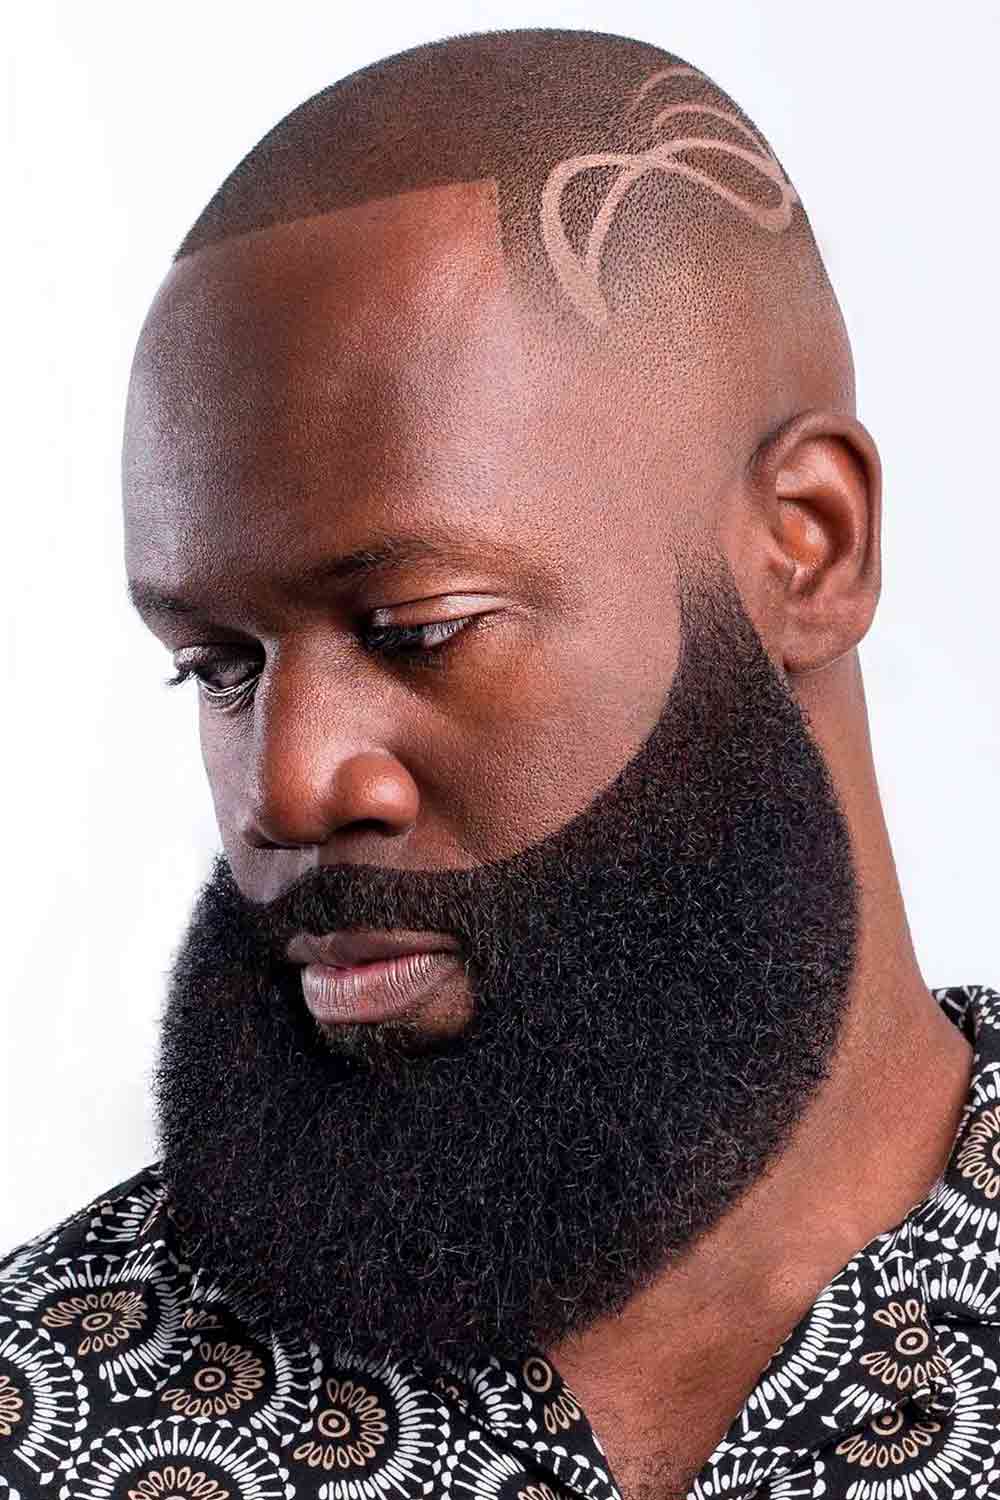 Bald Head With Design And Full Beard #blackmenhaircuts #blackmenhairstyles #afrohaircuts #haircutsforblackmen